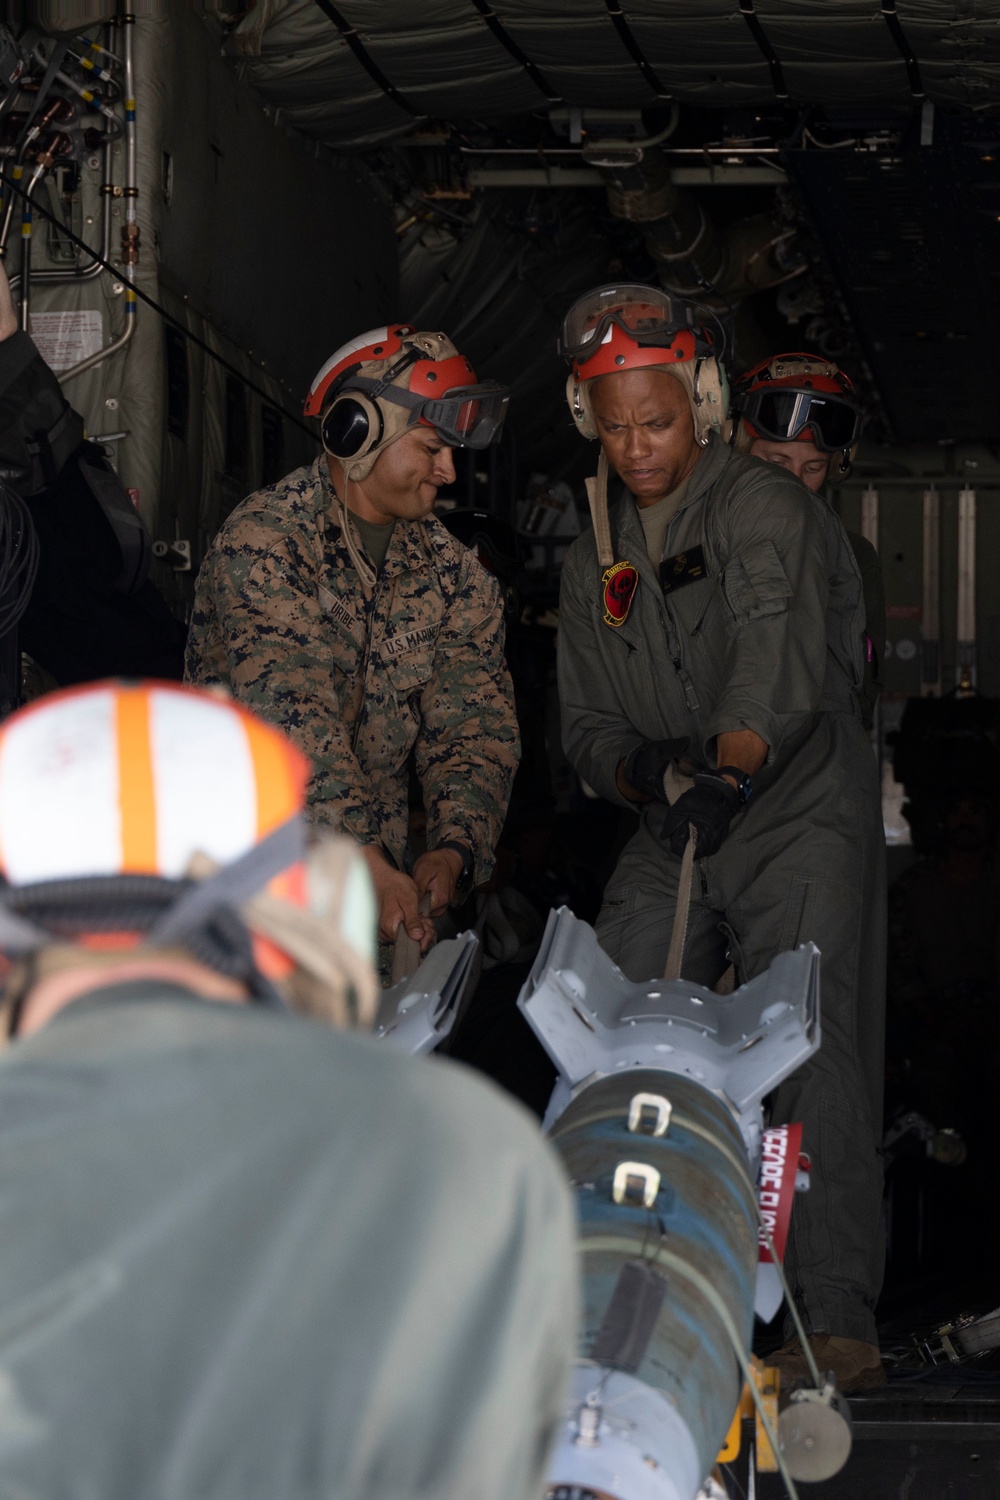 U.S. Air Force, Marines conduct joint training